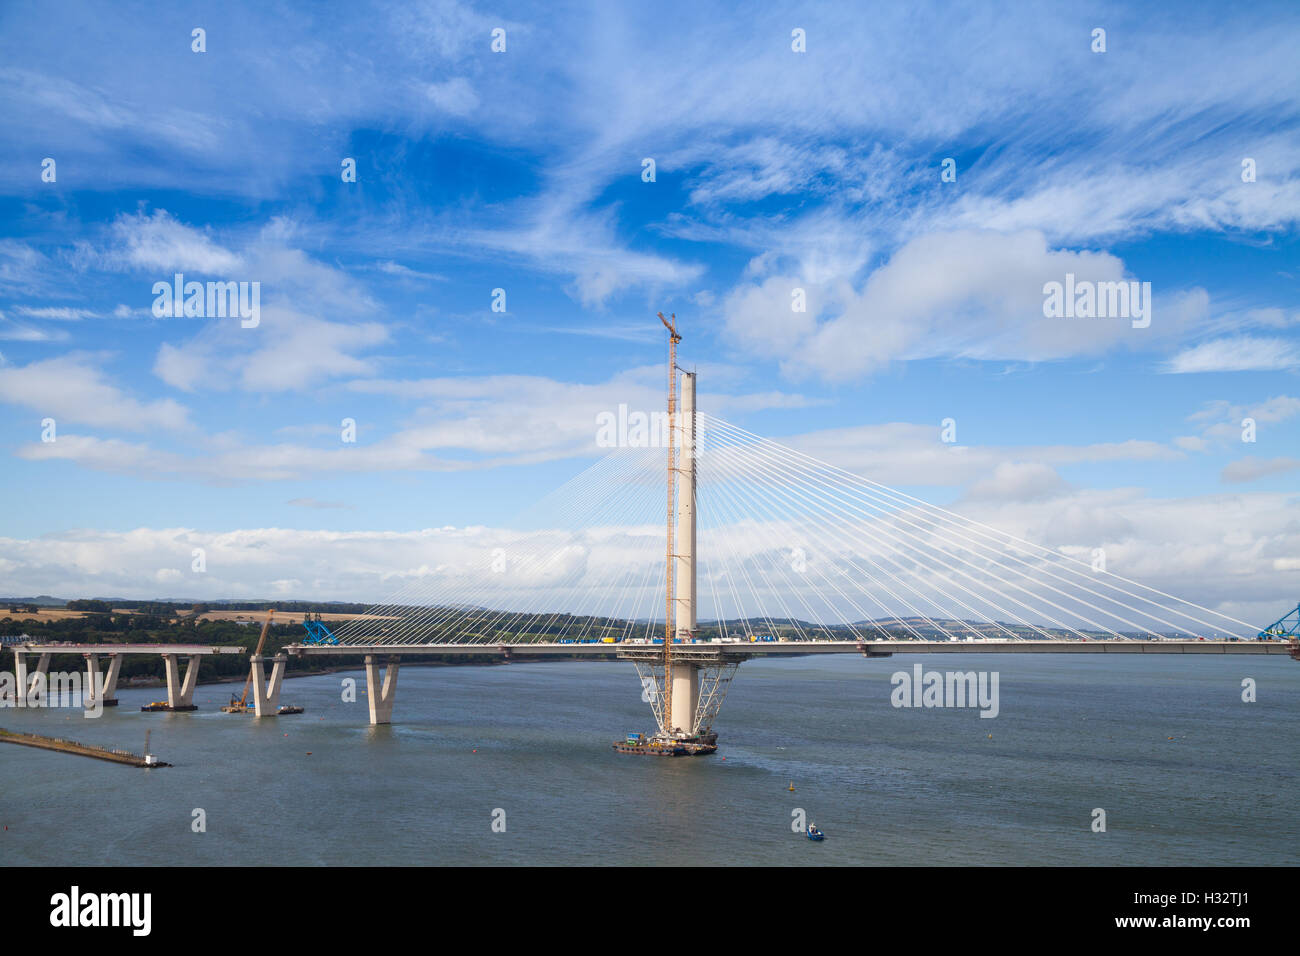 Building of the new Queensferry Crossing over the Firth of Forth, Scotland. Stock Photo